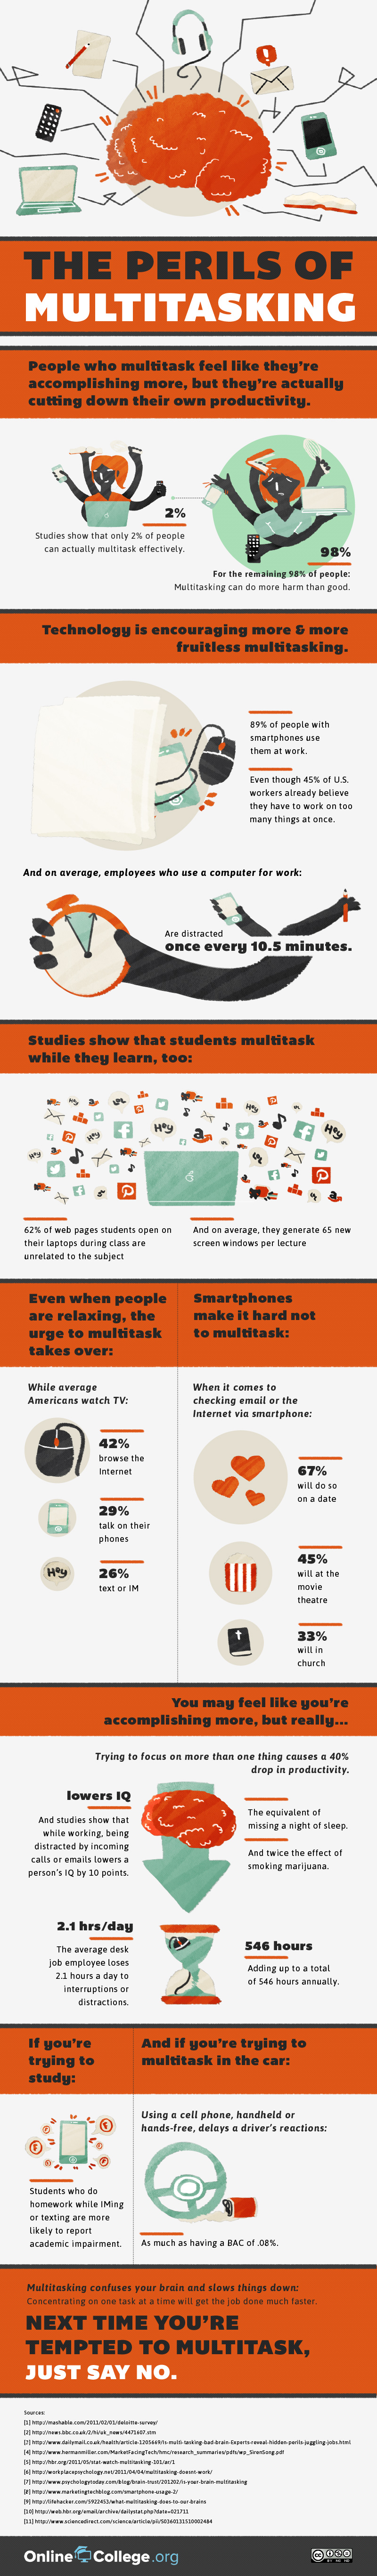 The Perils of Multitasking. People who multitask feel like they're accomplishing more, but they're actually cutting down their own productivity. Studies show that only 2% of people can actually multitask effectively. For the remaining 98% of people, multitasking can do more harm than good. Technology is encouraging more and more fruitless multitasking. 89% of people with smartphones use them at work, even though 45% of U.S. workers already believe they have to work on too many things at once. And on average, employees who use a computer for work are distracted once every 10.5 minutes. Studies show that students multitask while they learn, too: 62% of web pages students open on their laptops during class are unrelated to the subject. And on average, they generate 65 new screen windows per lecture. Even when people are relaxing, the urge to multitask takes over. While average Americans watch TV, 42% browse the Internet, 29% talk on their phones, and 26% text or IM. Smartphones make it hard not to multitask. When it comes to checking email or the Internet via smartphone, 67% will do so on a date, 45% will at the movie theater, and 33% will in church. You may feel like you're accomplishing more, but really trying to focus on more than one thing causes a 40% drop in productivity, the equivalent of missing a night of sleep and twice the effect of smoking marijuana. Multitasking lowers IQ. And studies show that while working, being distracted by incoming calls or emails lowers a person's IQ by 10 points. The average desk job employee loses 2.1 hours a day to interruptions or distractions, adding up to 546 hours annually. If you're trying to study, students who do homework while IMing or texting are more likely to report academic impairment. And if you're trying to multitask in the car, using a cell phone, handheld or hands-free, delays a driver's reactions as much as have a blood alcohol content level of 0.8%. Multitasking confuses your brain and slows things down. Concentrating on one task at a time will get the job done much faster. Next time you're tempted to multitask, just say no.